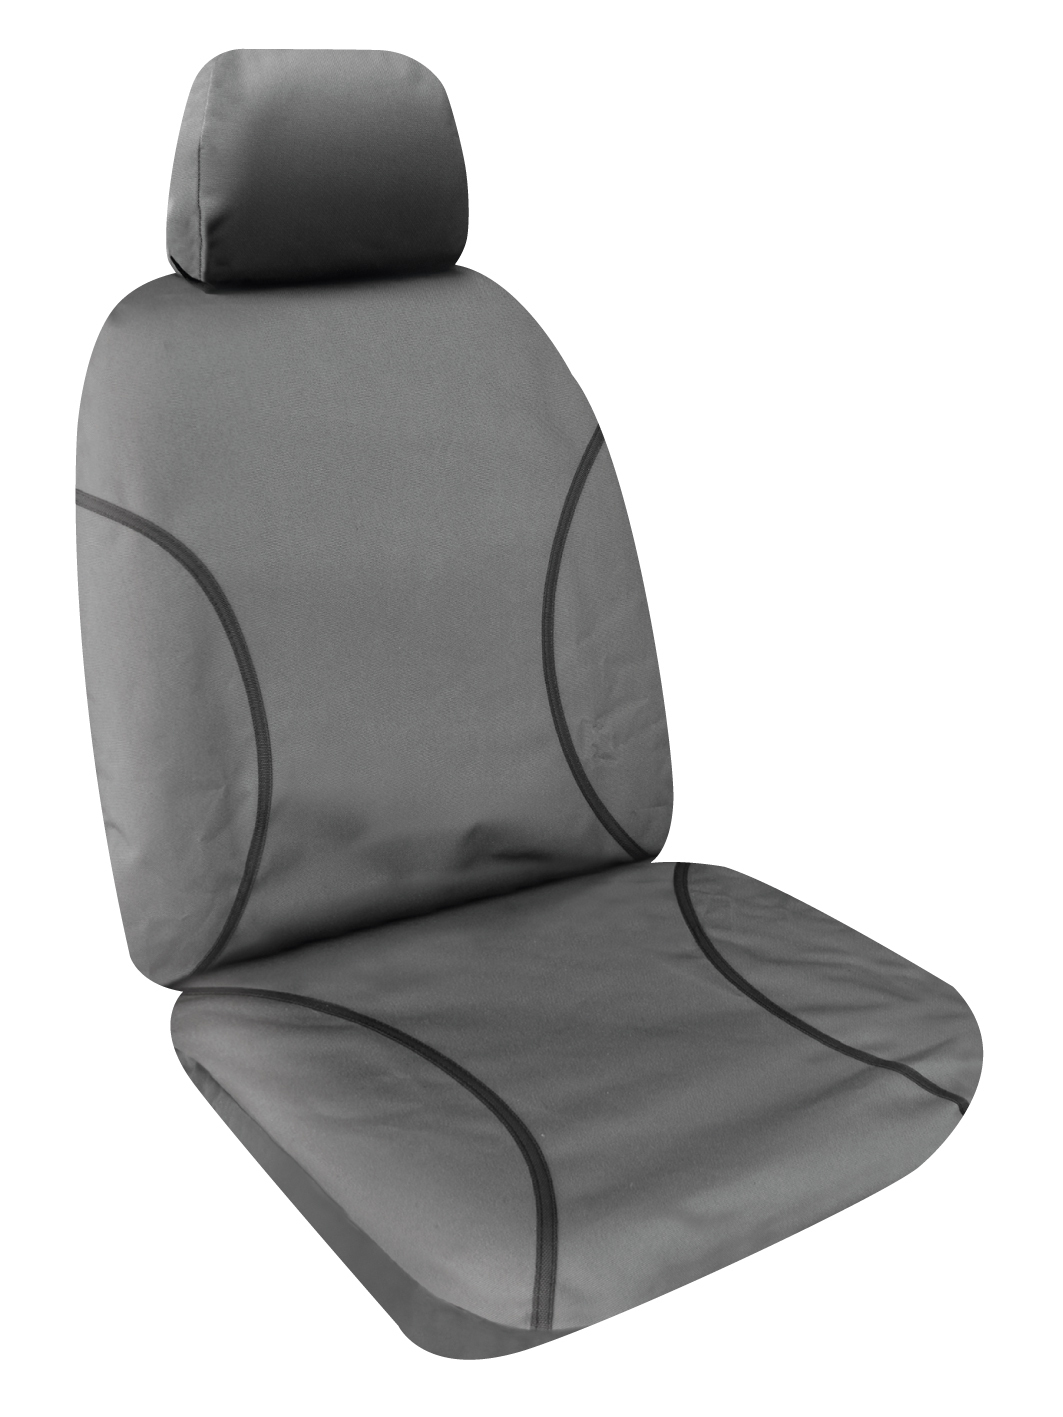 SPERLING FRONT ROW TRADIES CANVAS SEATCOVERS (AVAILABLE IN BLACK AND GREY) TO SUIT TOYOTA HILUX ALL BADGES DUAL/SINGLE CAB 2005 - 2015